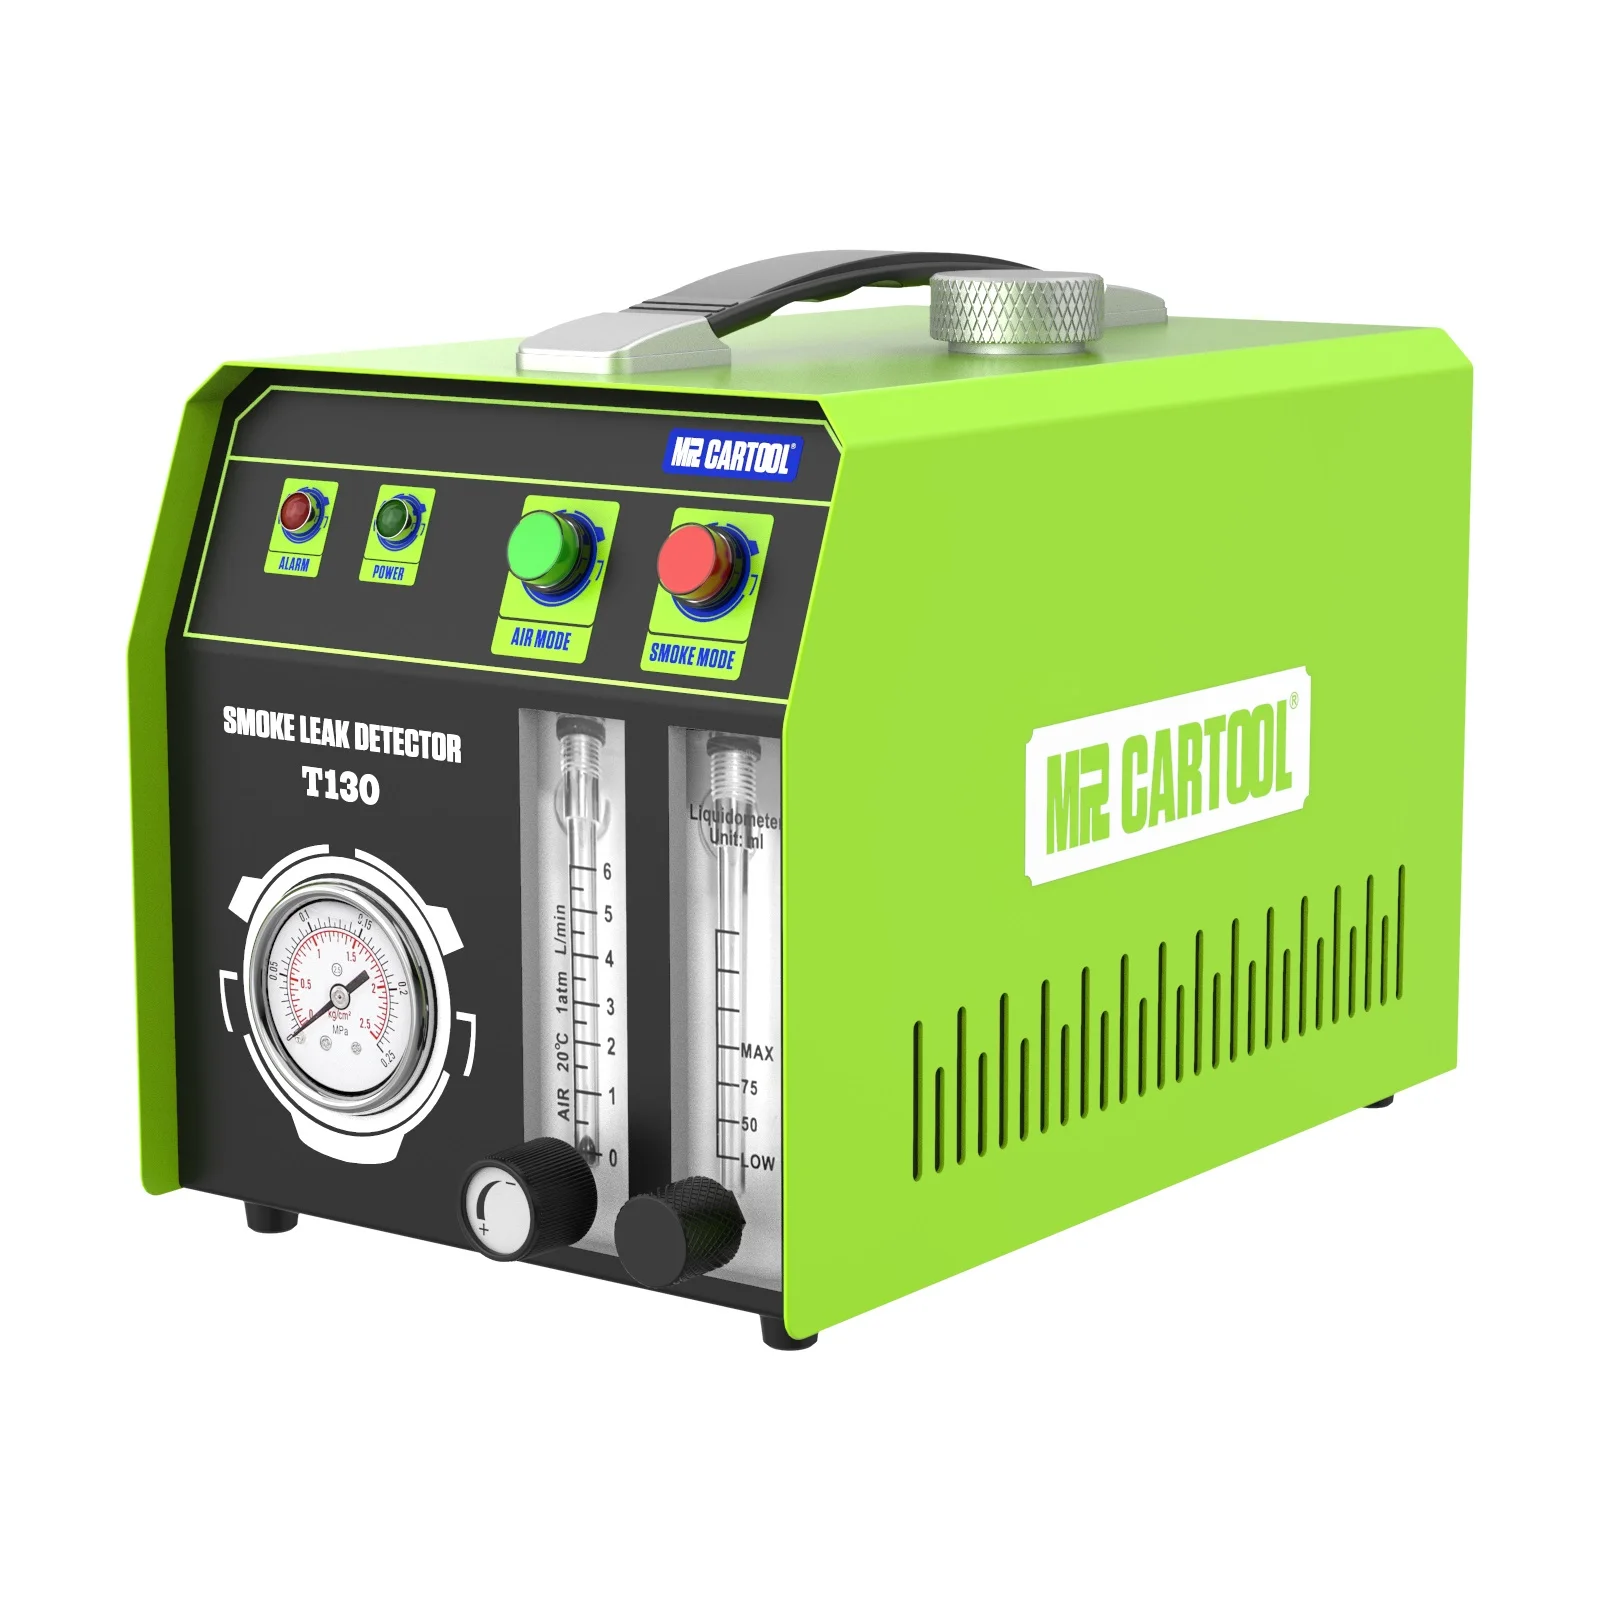 MR CARTOOL T130 Evap Leaks Testing Machine 12V Automotive Pipes Fuel Leakage Detector with Dual Modes for All Vehicles 